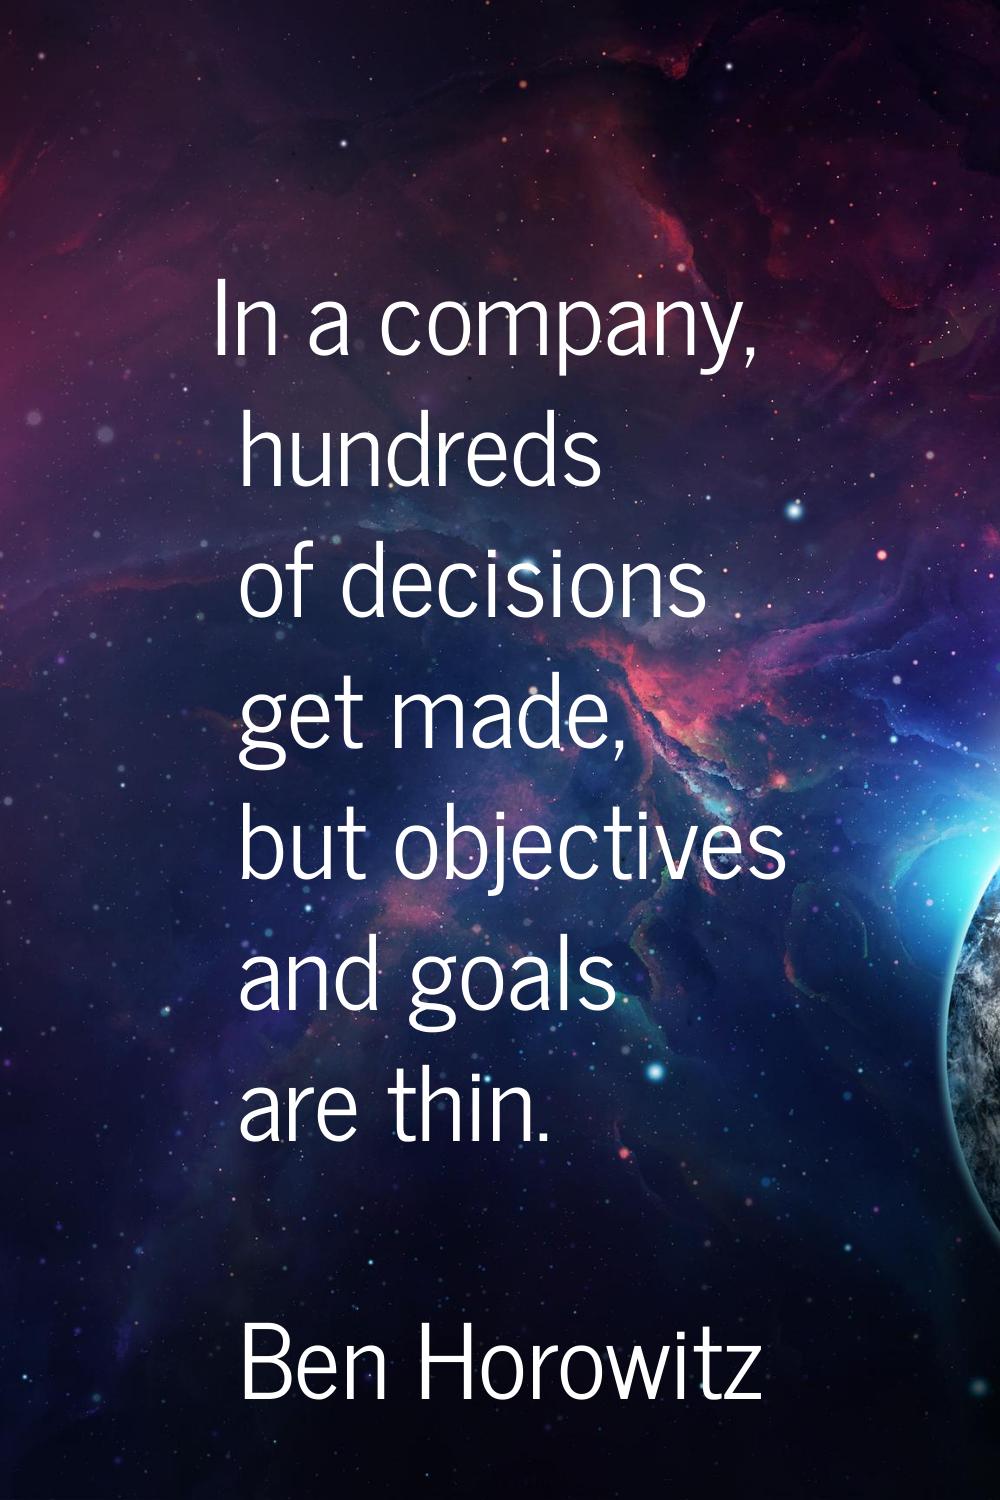 In a company, hundreds of decisions get made, but objectives and goals are thin.